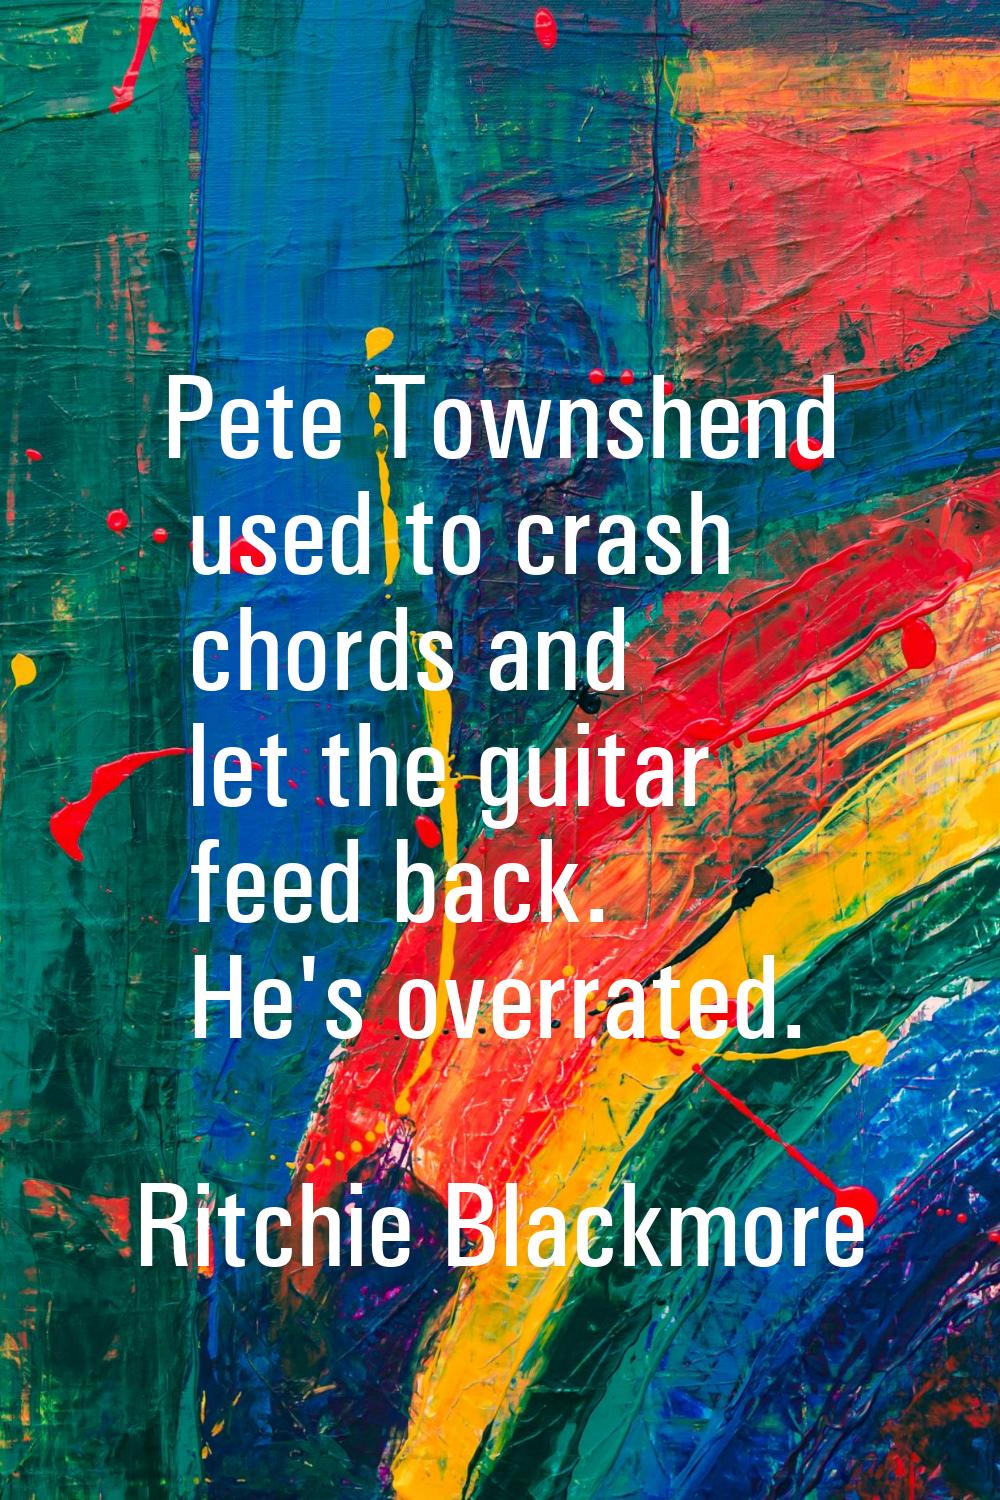 Pete Townshend used to crash chords and let the guitar feed back. He's overrated.